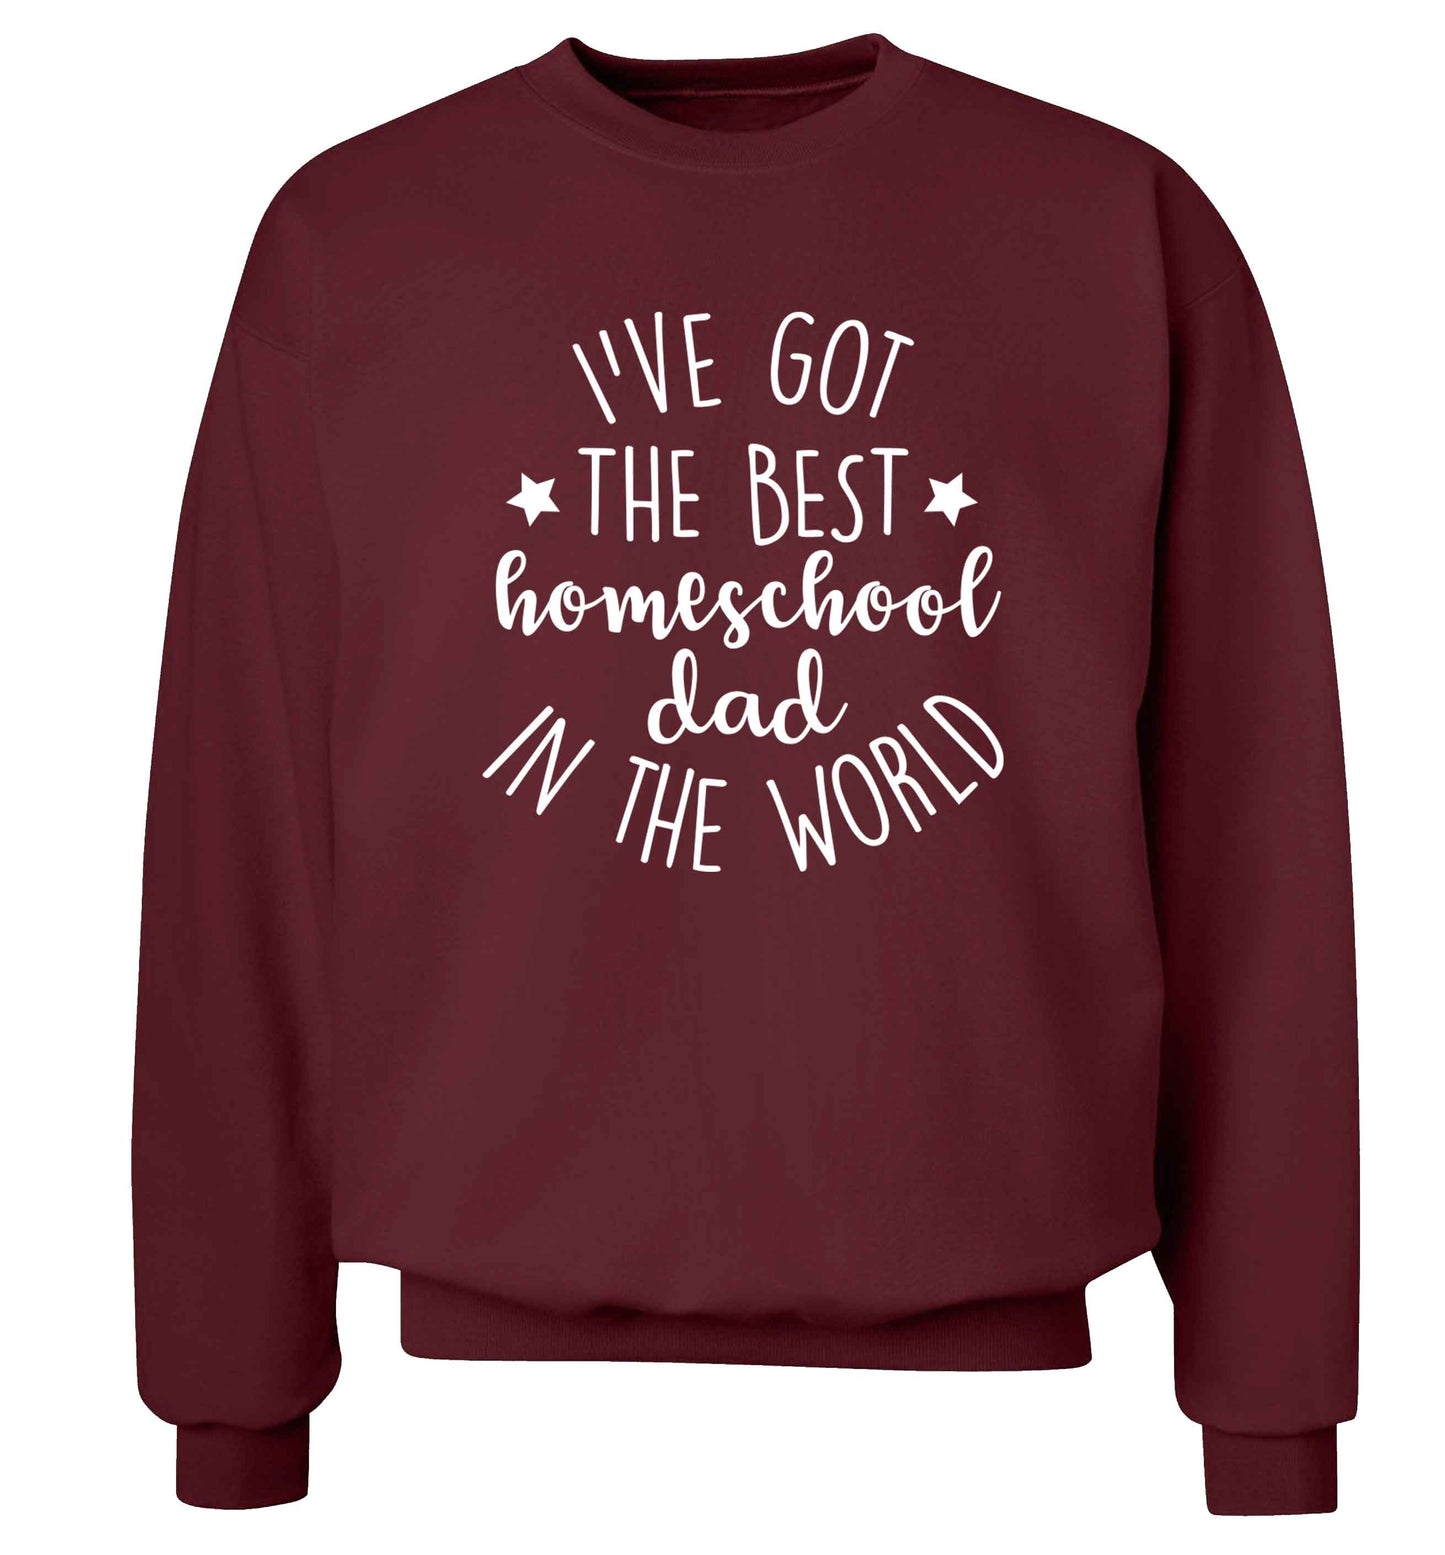 I've got the best homeschool dad in the world Adult's unisex maroon Sweater 2XL